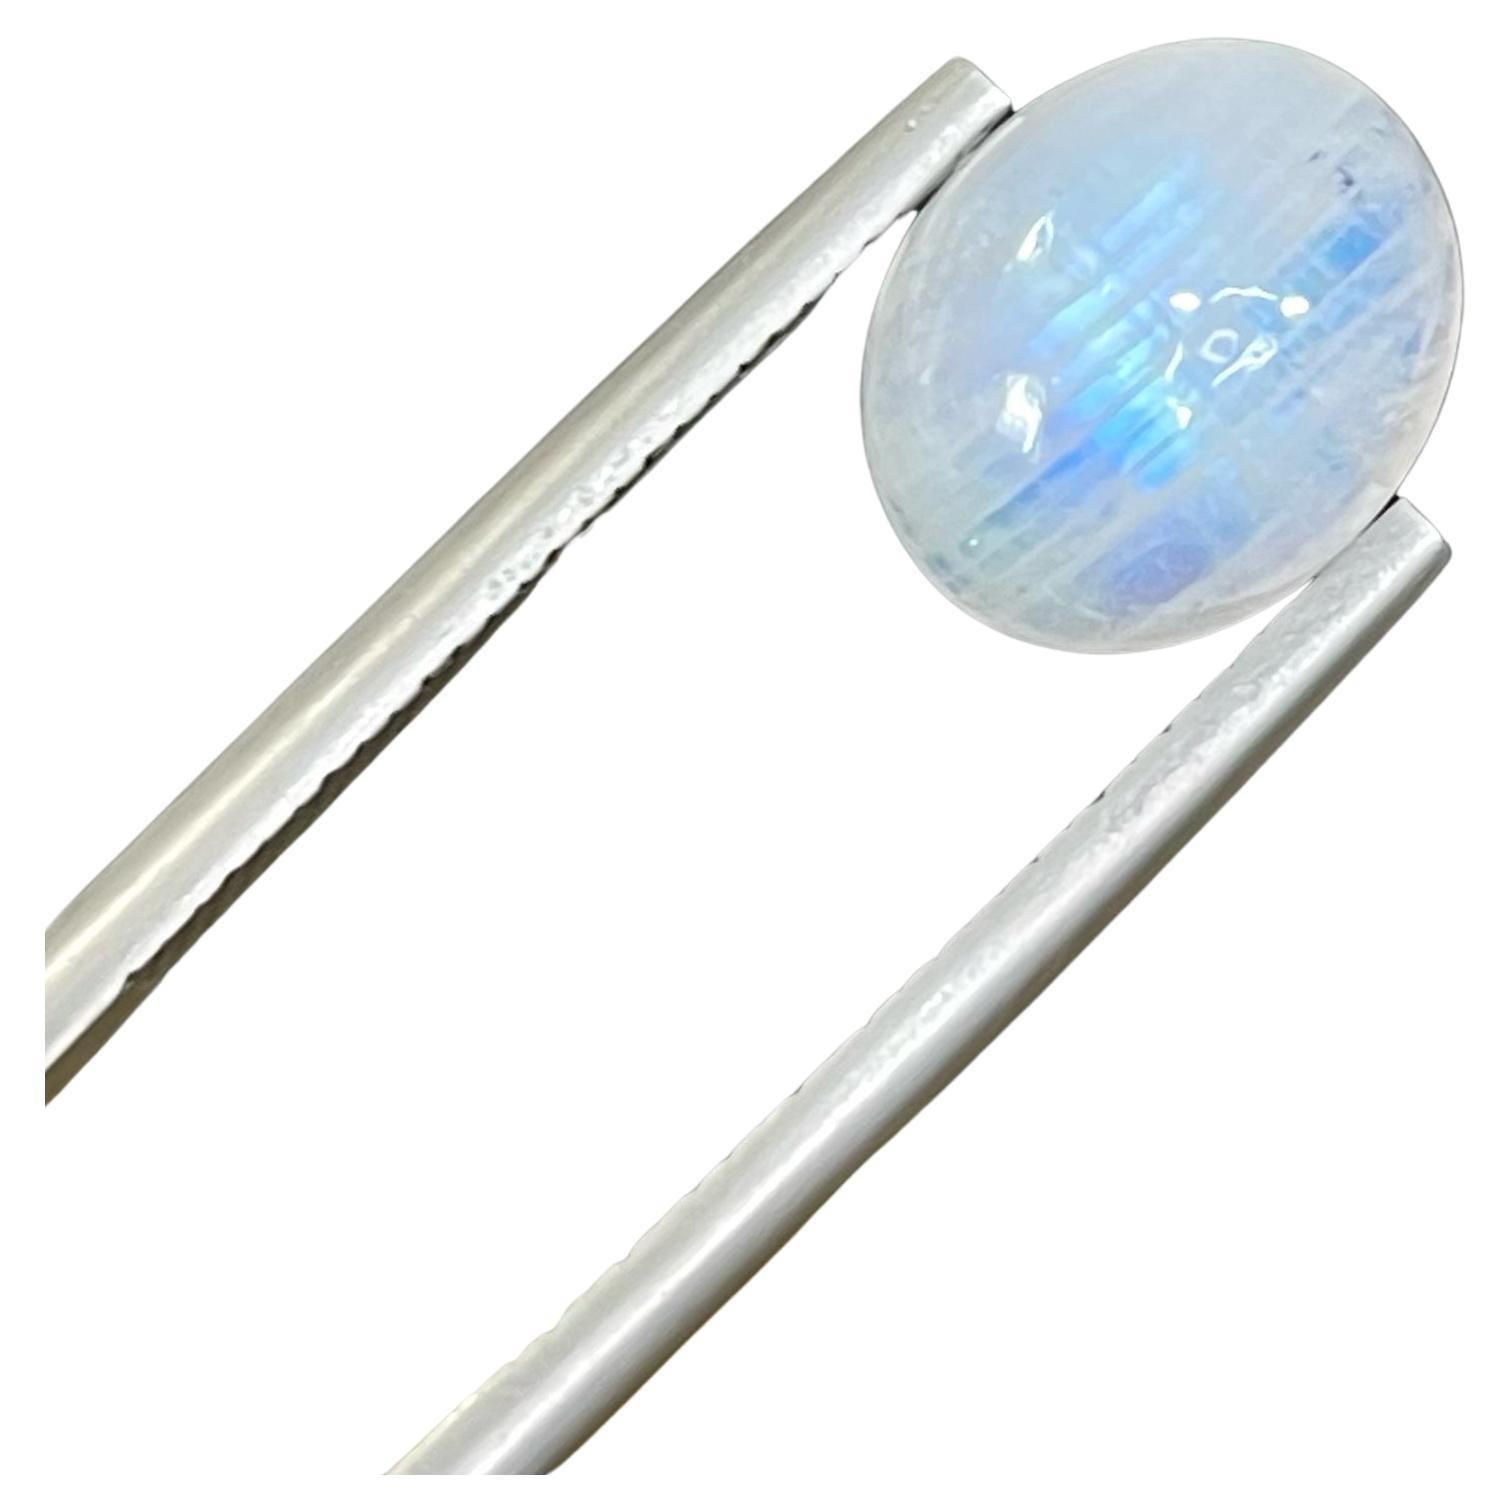 Spectacular Natural Loose Moonstone Gemstone 4.30 Carats Cabochon Cut For Sale